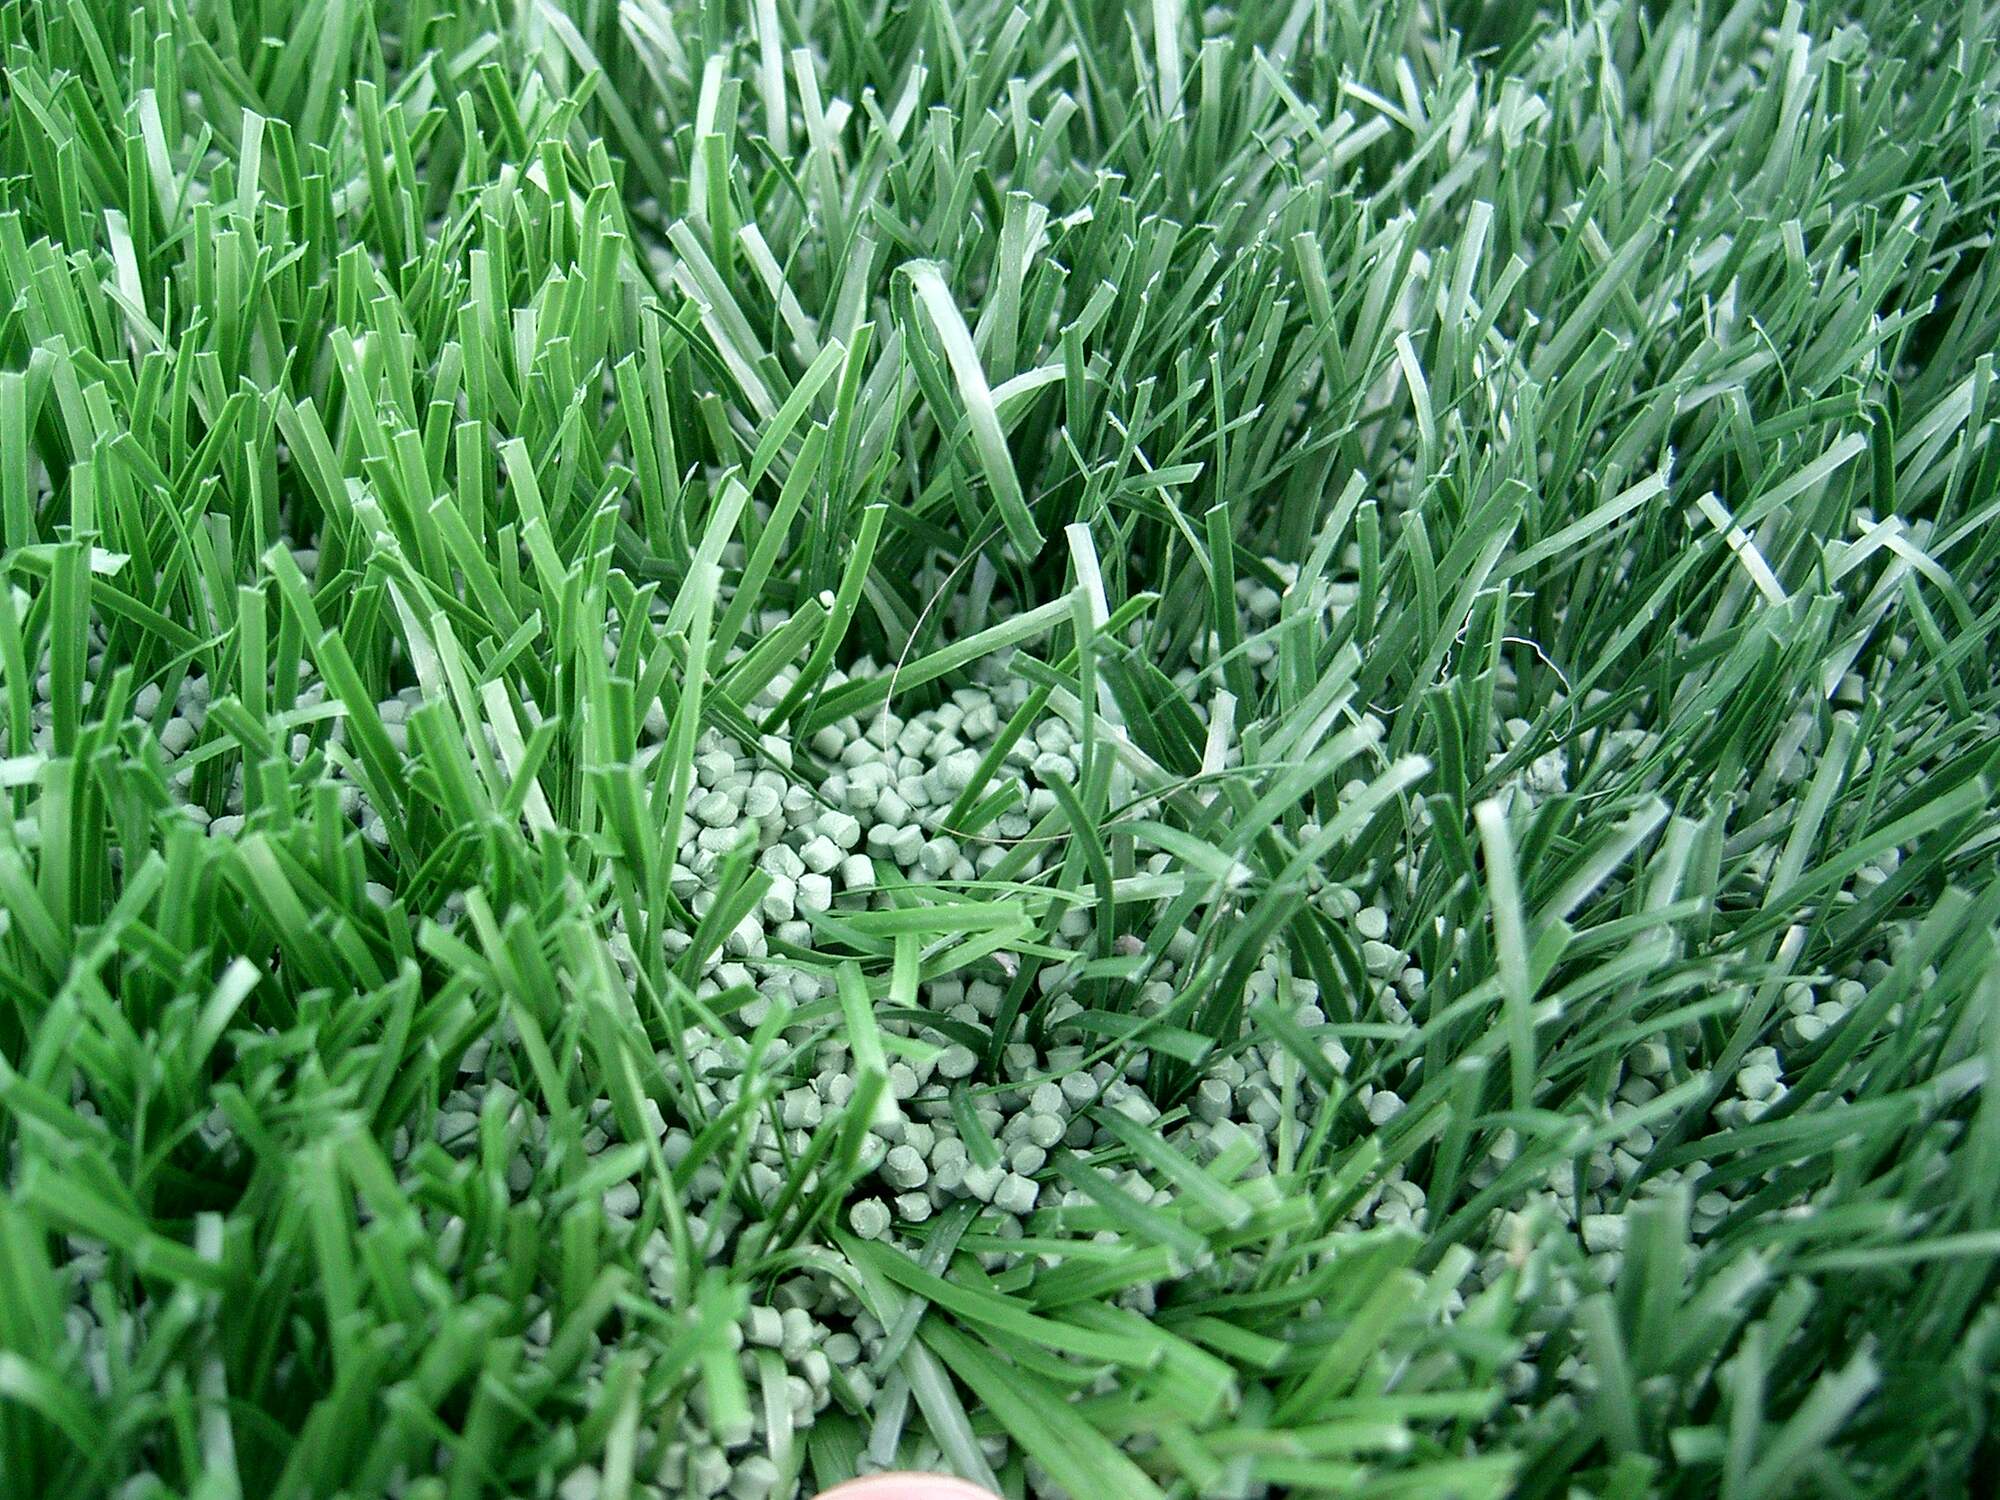 Photograph showing a detail of synthetic turf. The artificial grass blades and infill can be seen. The infill looks like small blue-green pellets.